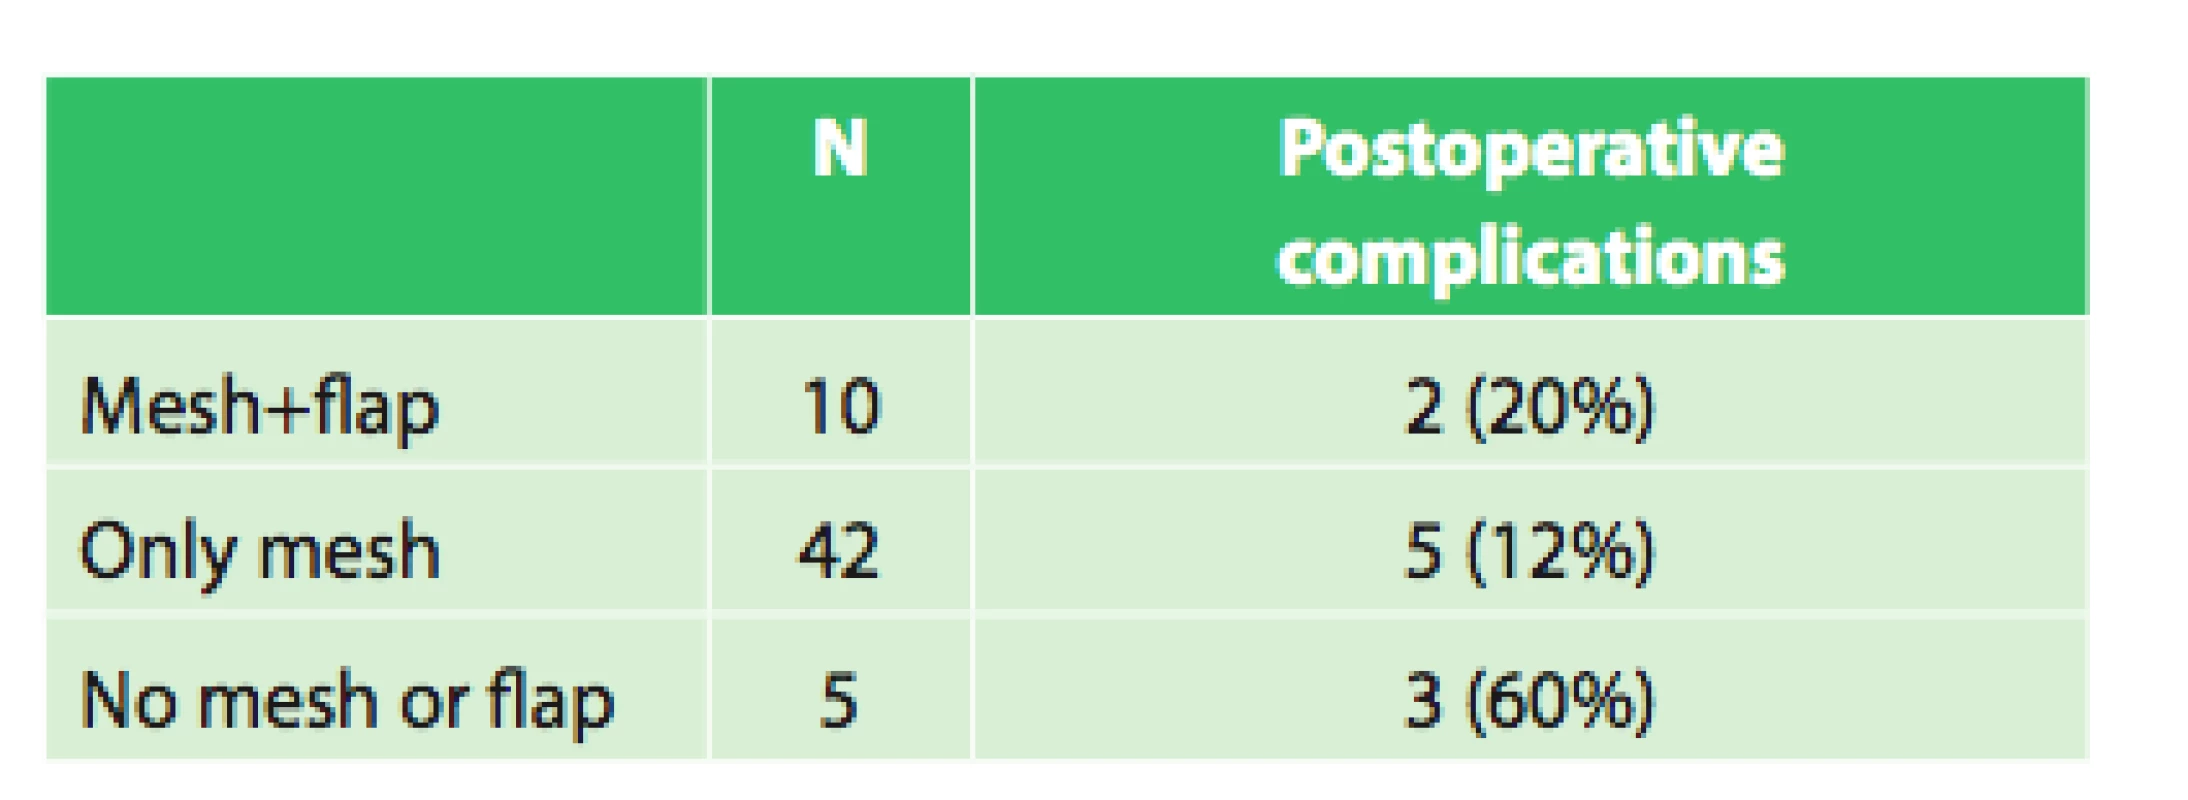 Postoperative complications in relation to the use of mesh and flap